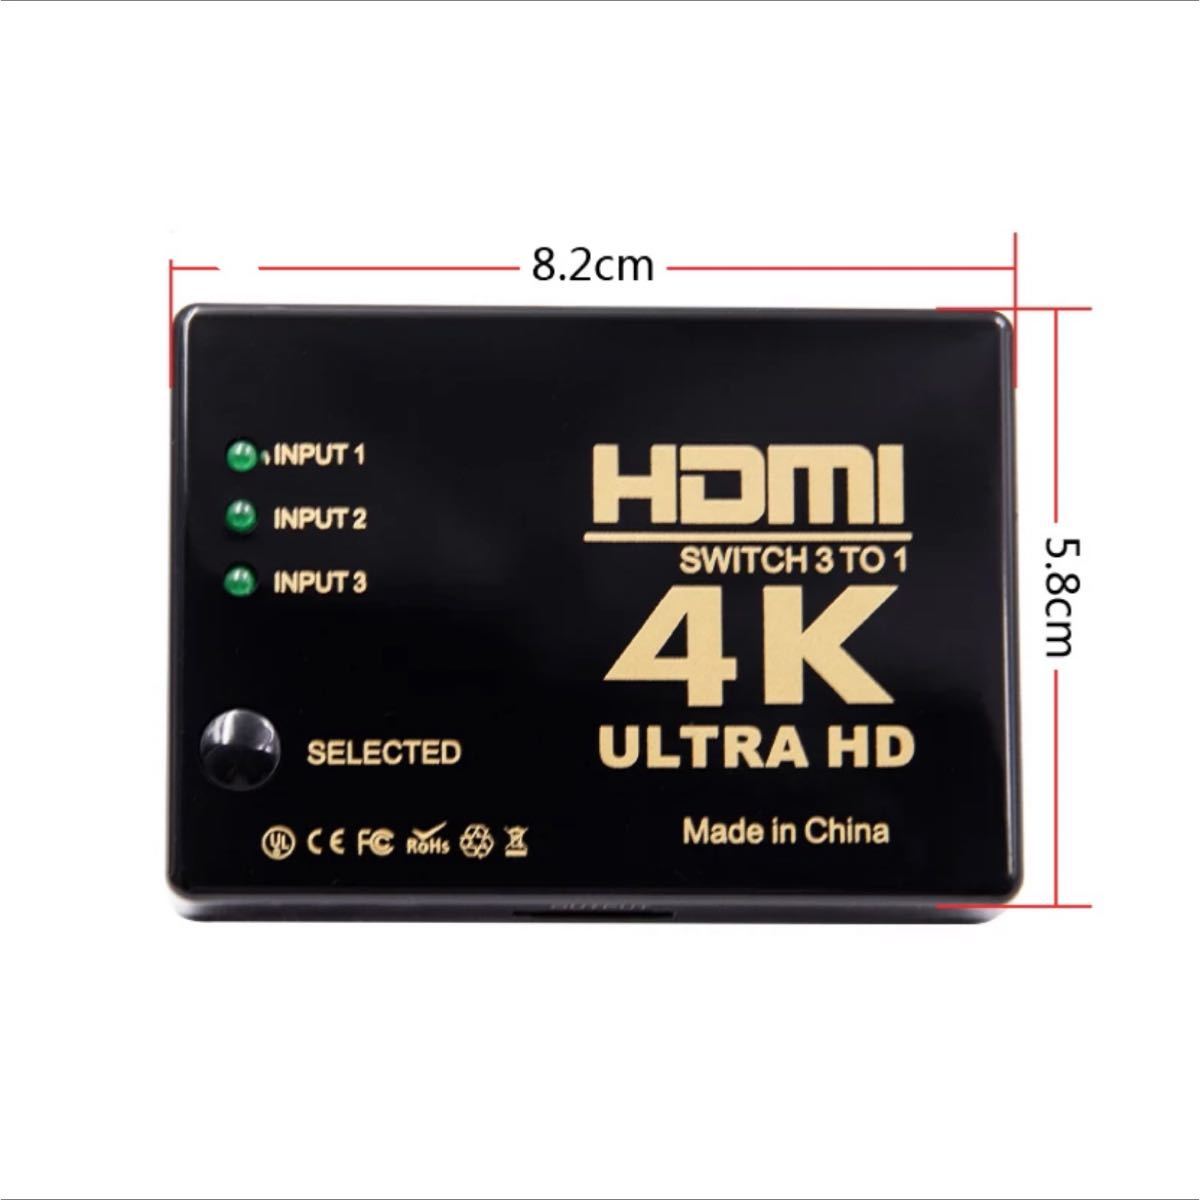 HDMI セレクター 4K 3D hdmi切替器 3ポート 3in1 リモコン付